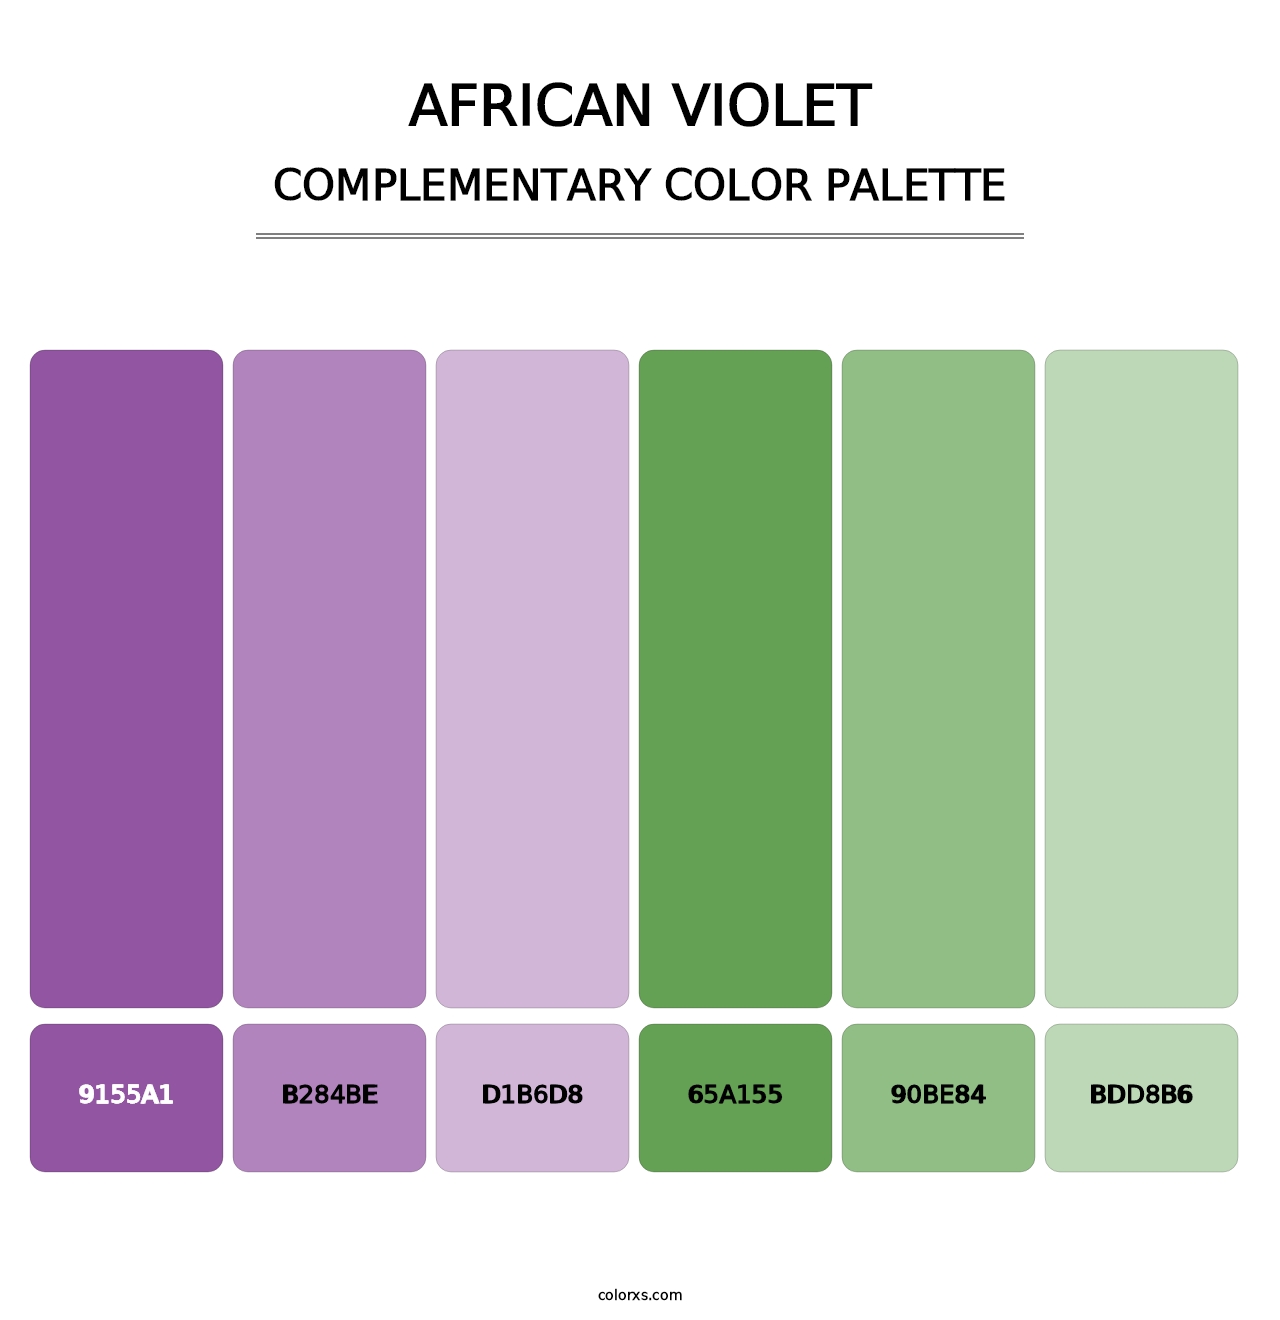 African Violet - Complementary Color Palette